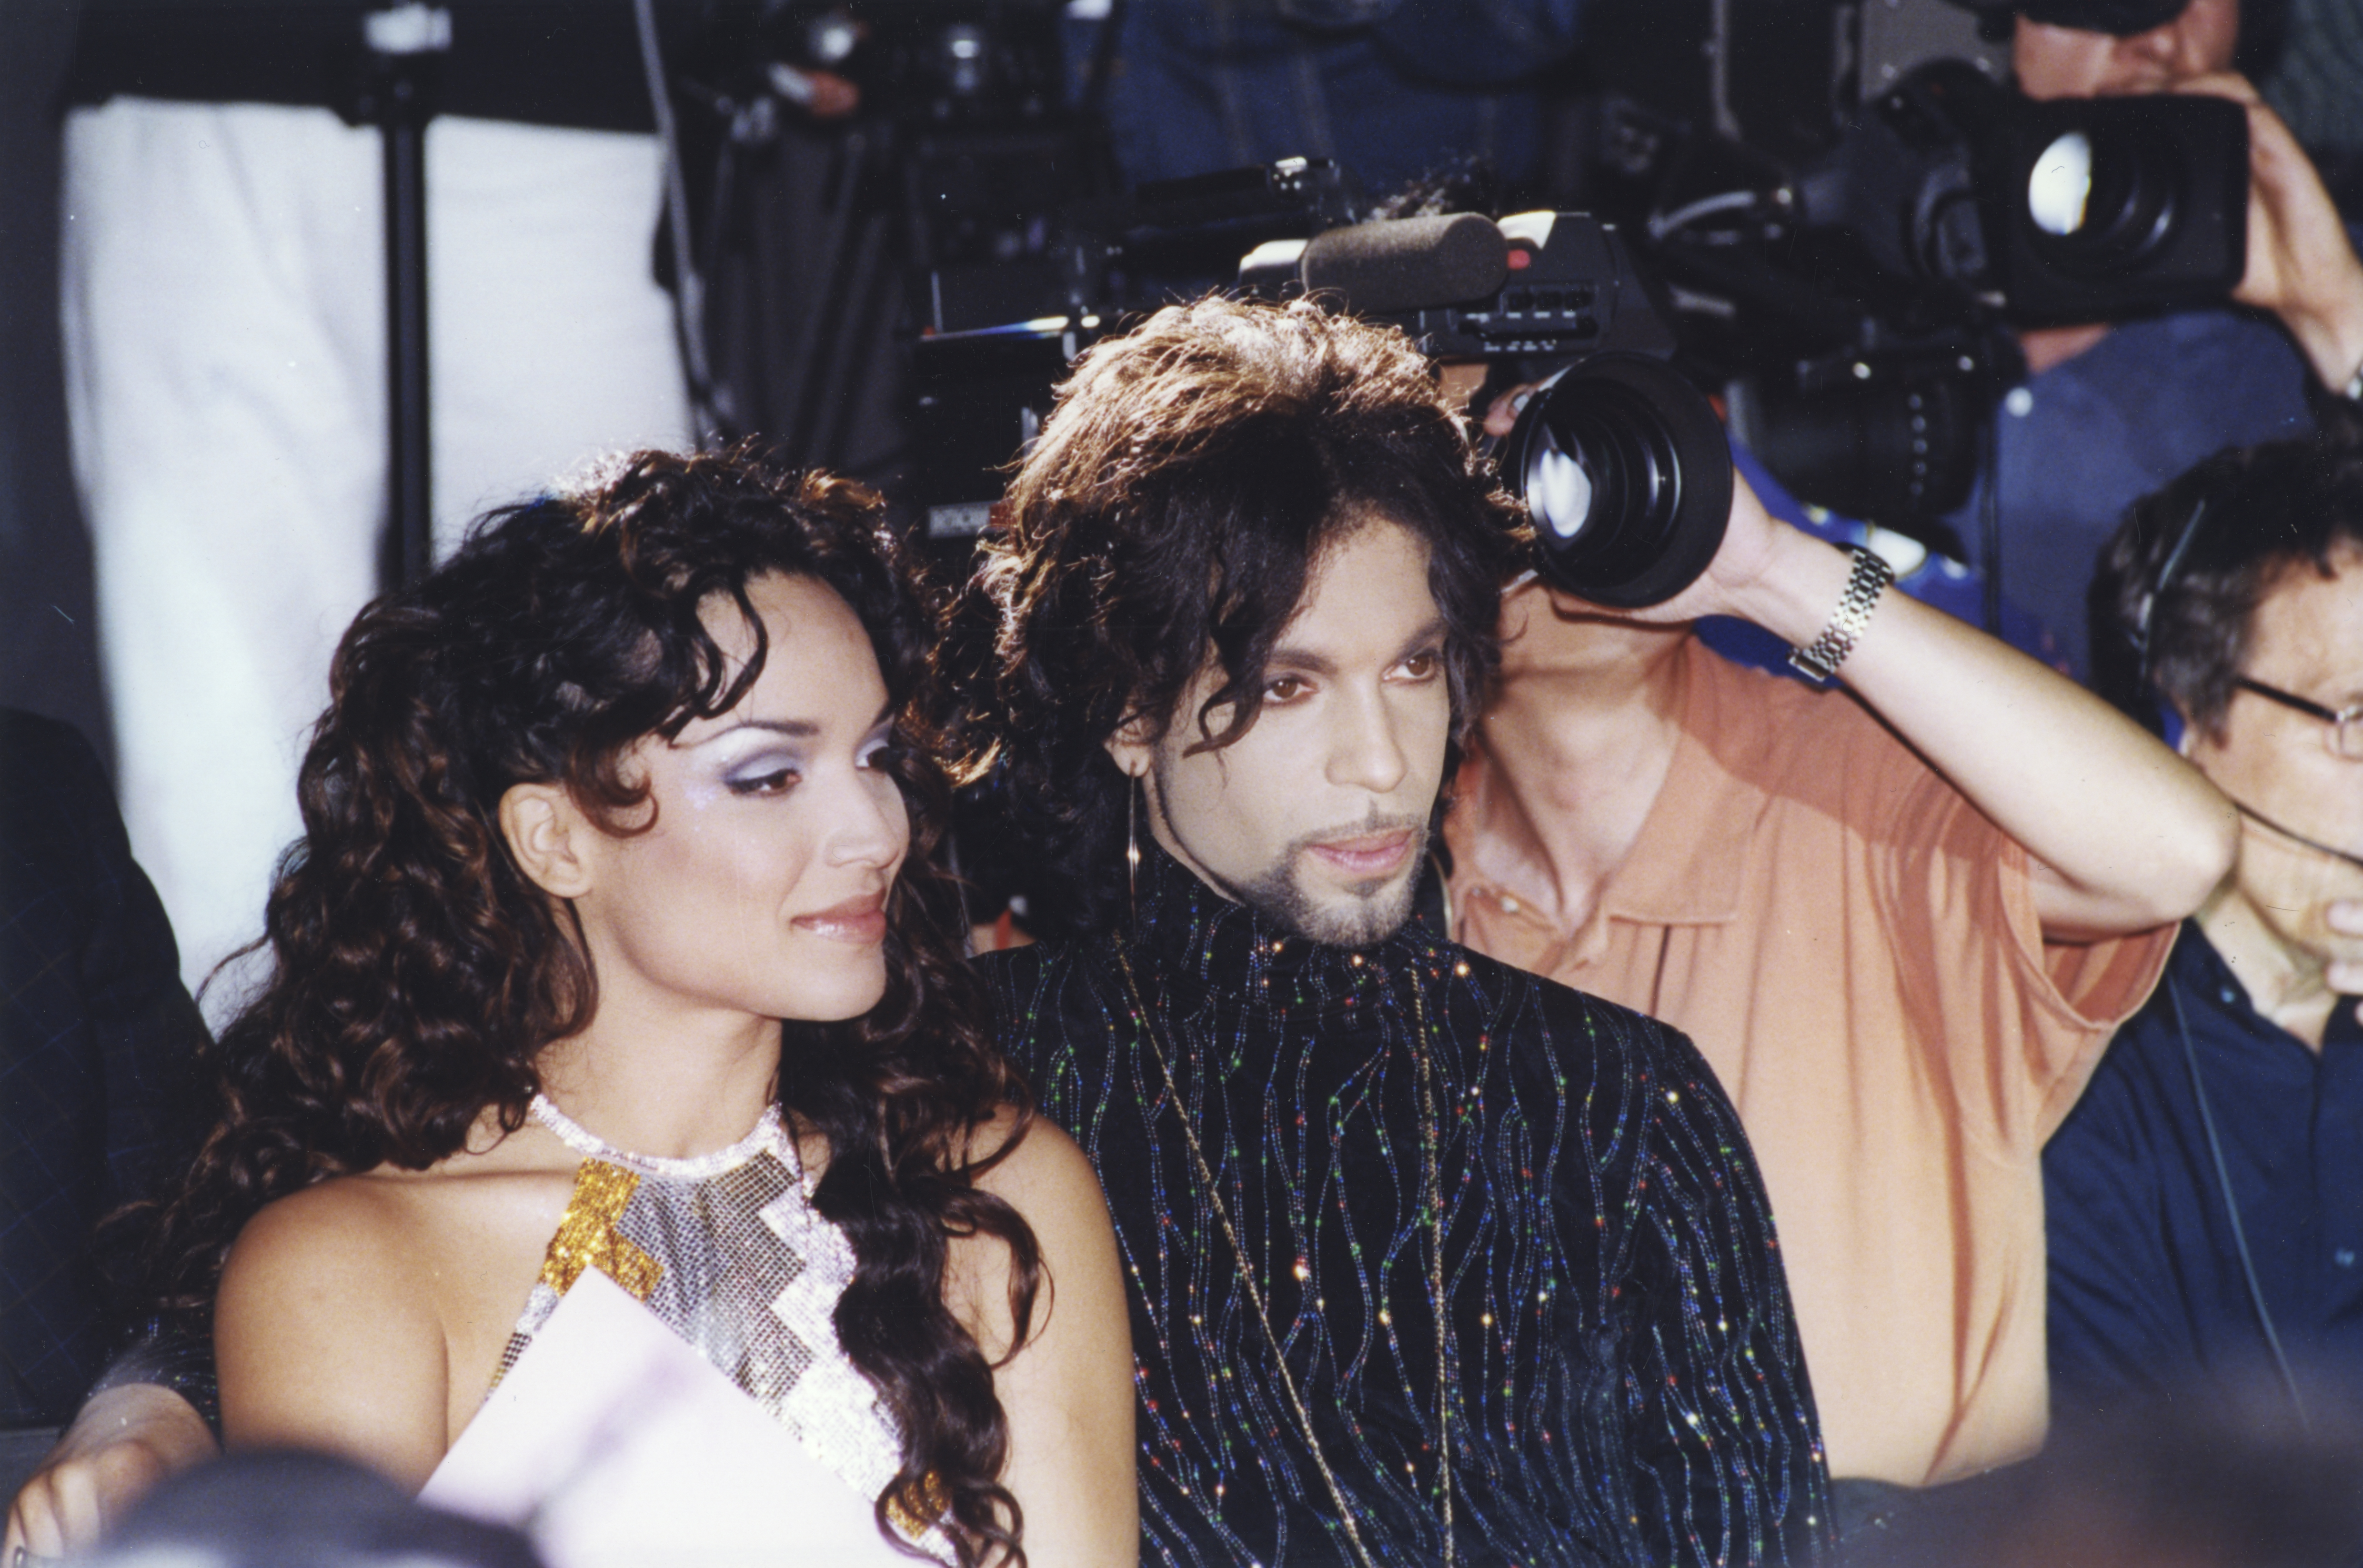 Prince Rogers Nelson and Mayte Garcia at the Versace fashion show on July 15, 1999 in Paris, France | Source: Getty Images